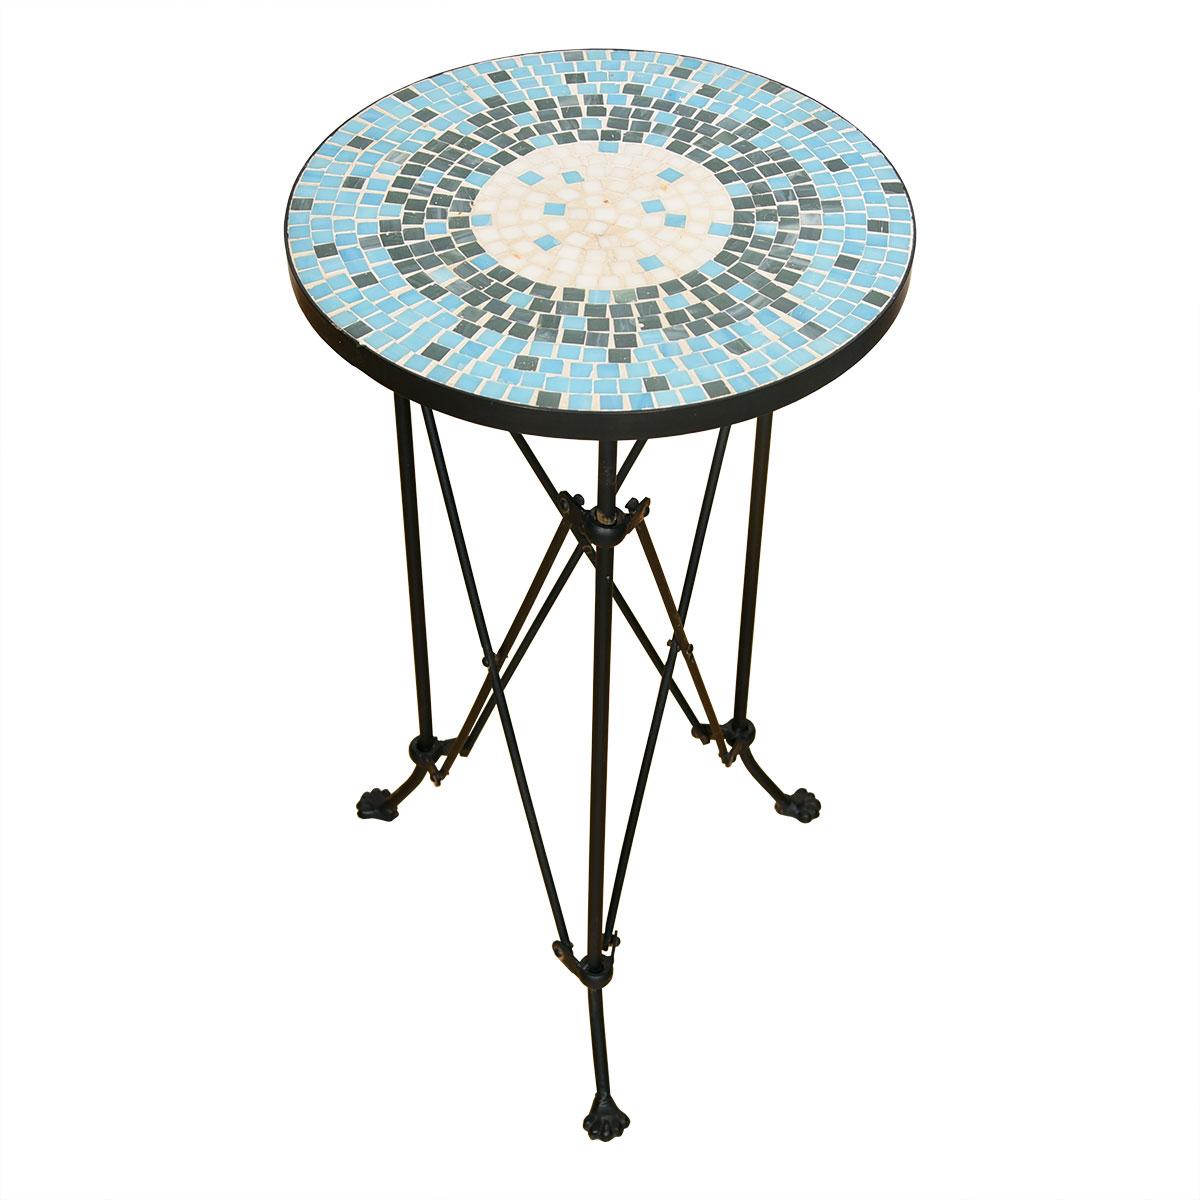 Wrought Iron midcentury Mosaic Tile Top Accent Table

Additional information:
Material: Iron
Featured at Kensington.:
Here we have a round accent table with a Mosaic Tile surface and metal trim and legs. This is perfect as an sunroom side table